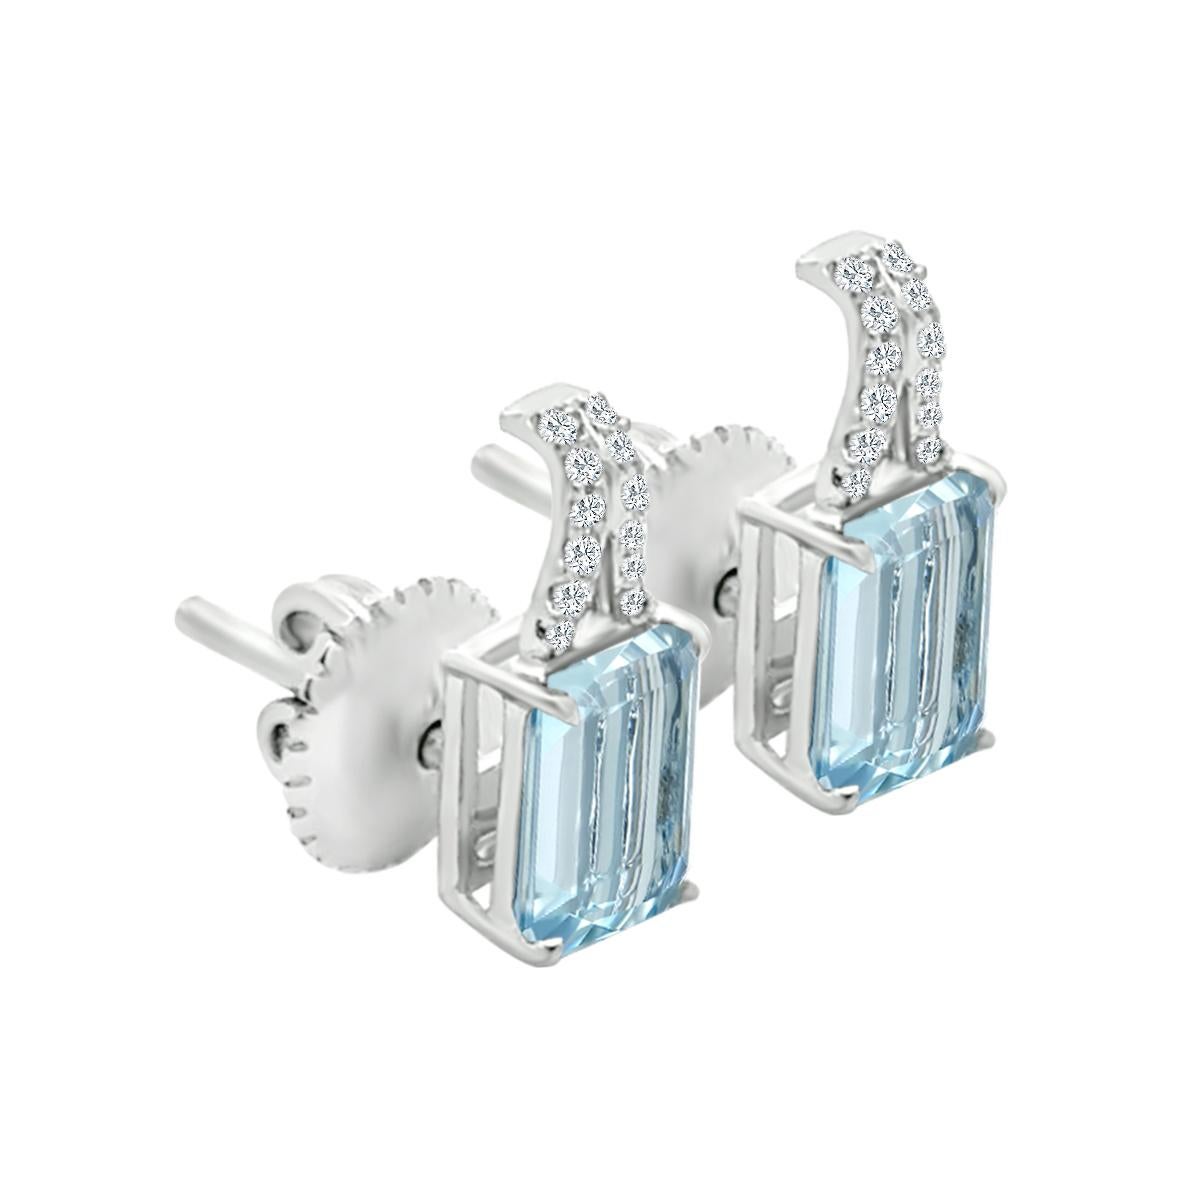 Modern 14k White Gold 1.74cts Aquamarine and Diamond Earring, Style#TS1305AQE 22029/6 For Sale